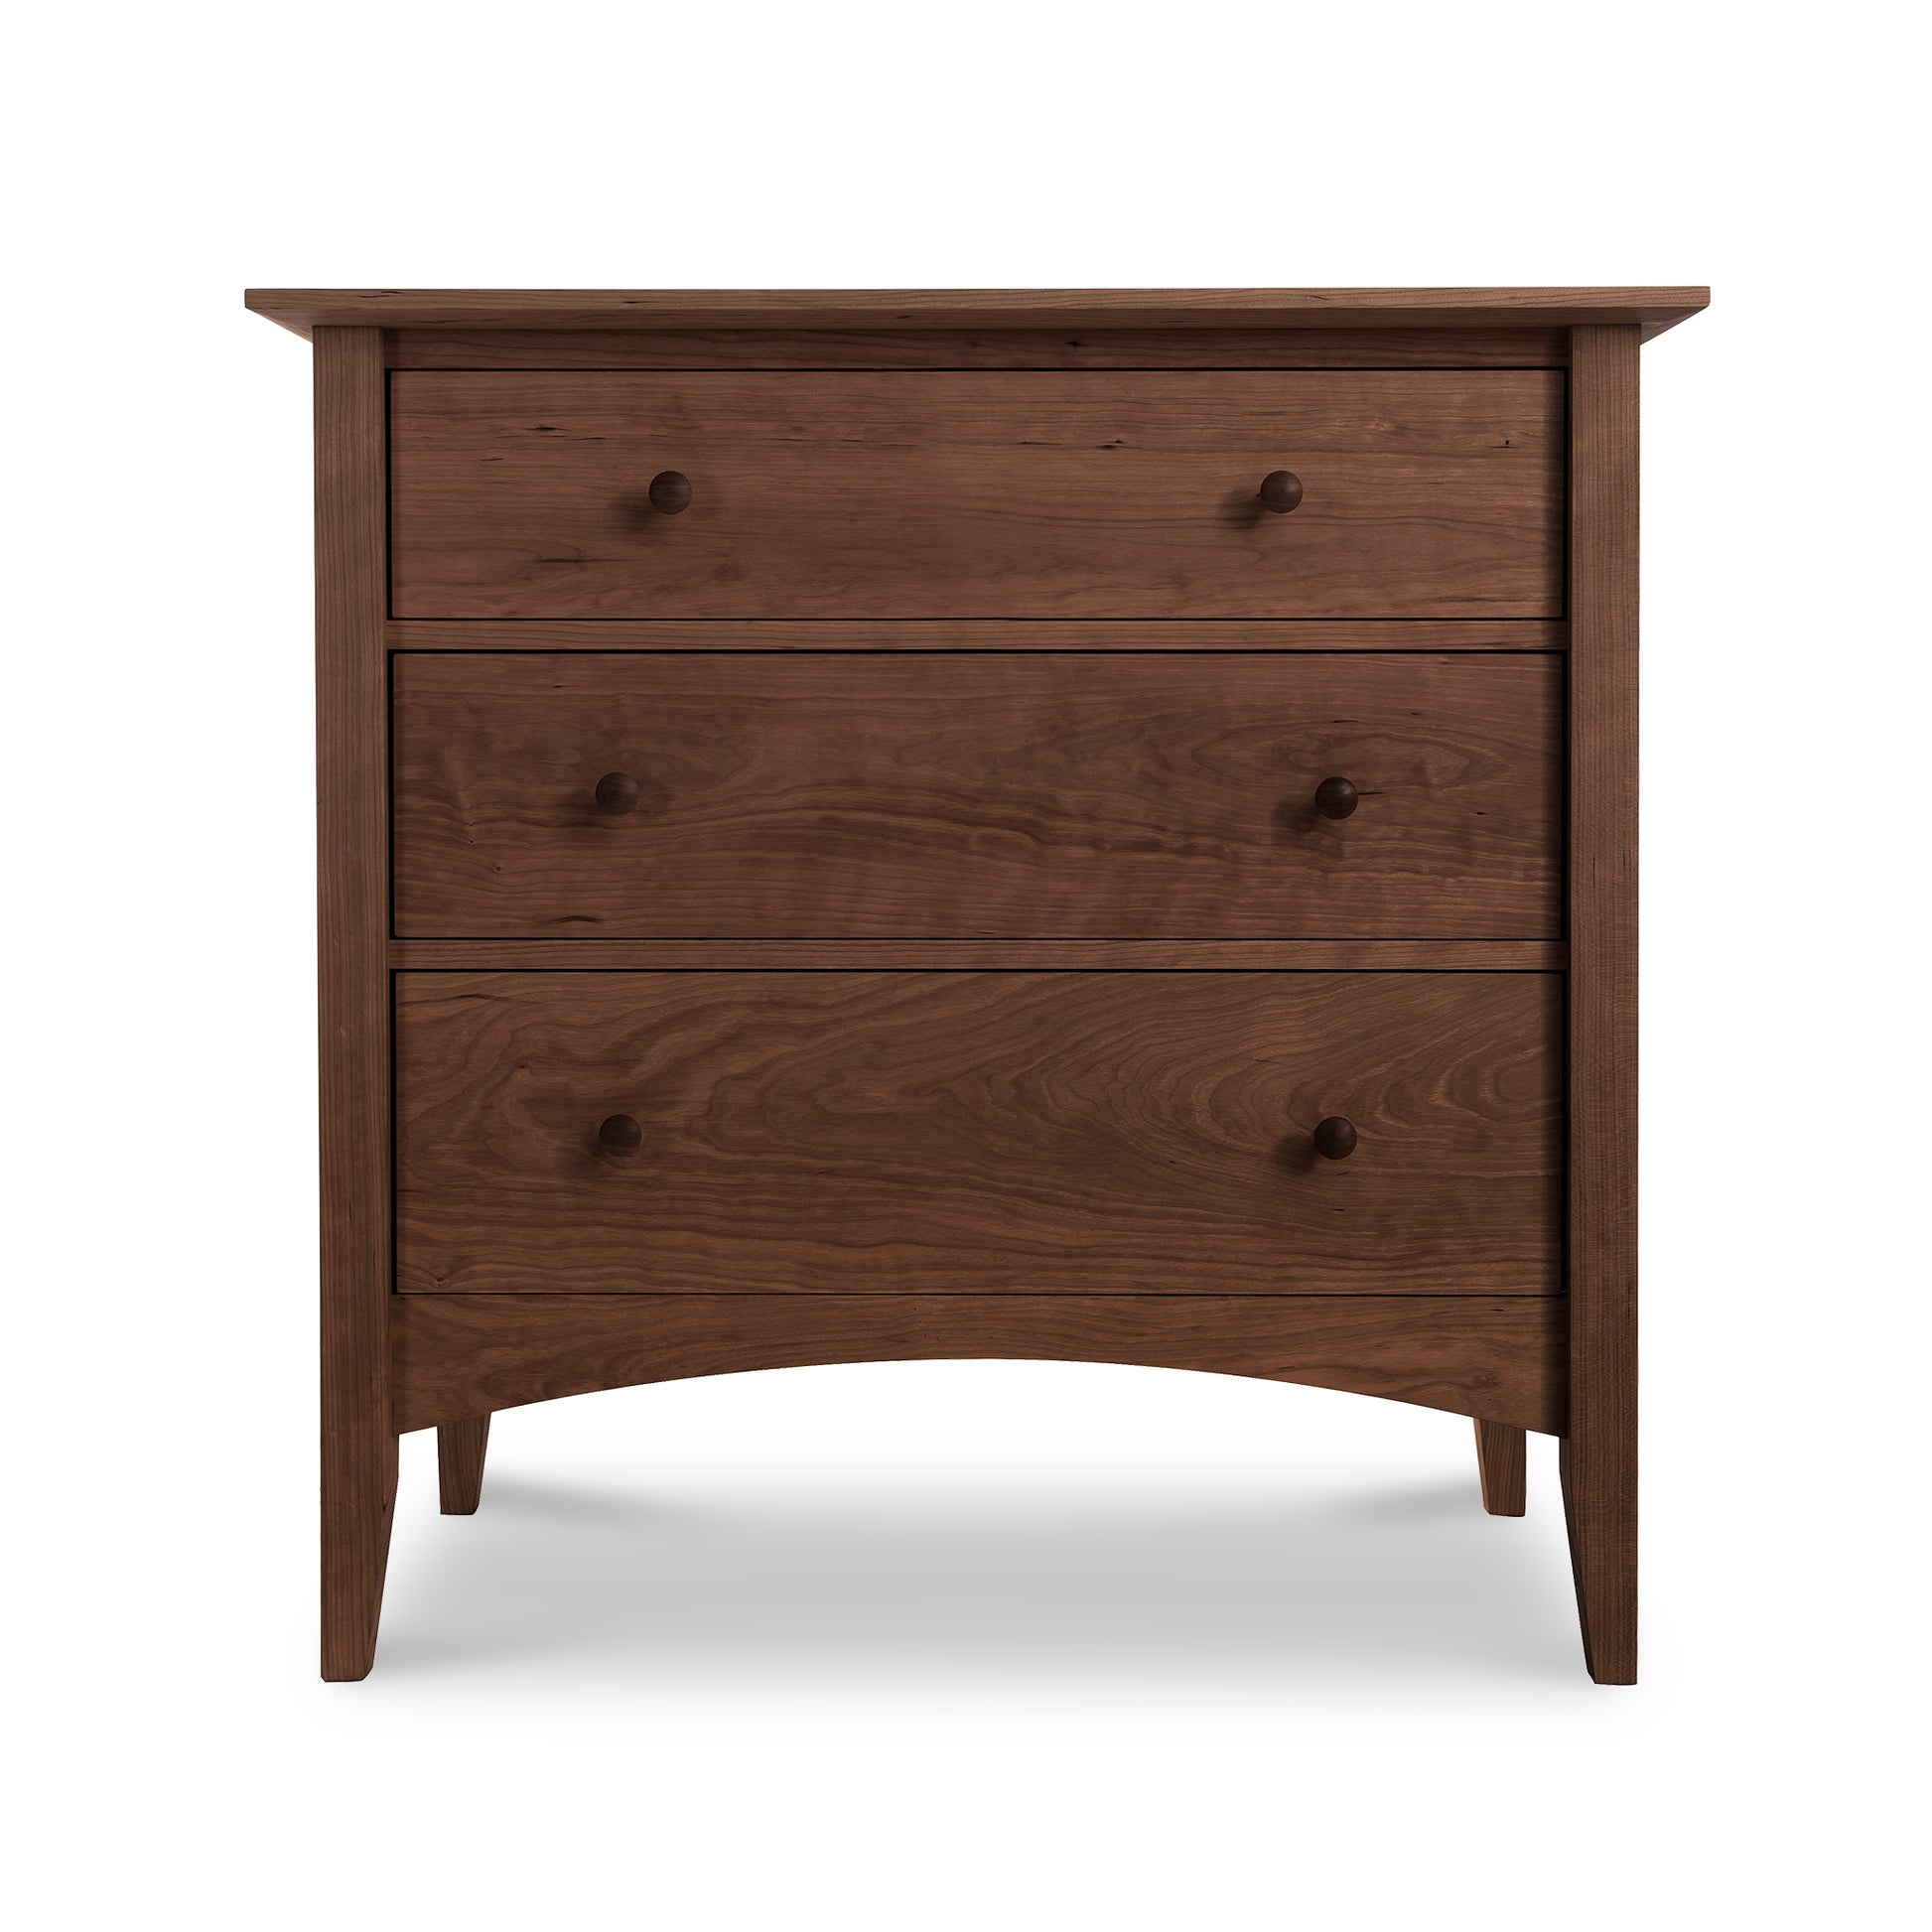 A Maple Corner Woodworks American Shaker 3-Drawer Chest featuring three drawers of varying sizes, a smooth finish, and tapered legs. The sustainably harvested natural solid wood has a rich, brown color and prominent grain patterns.